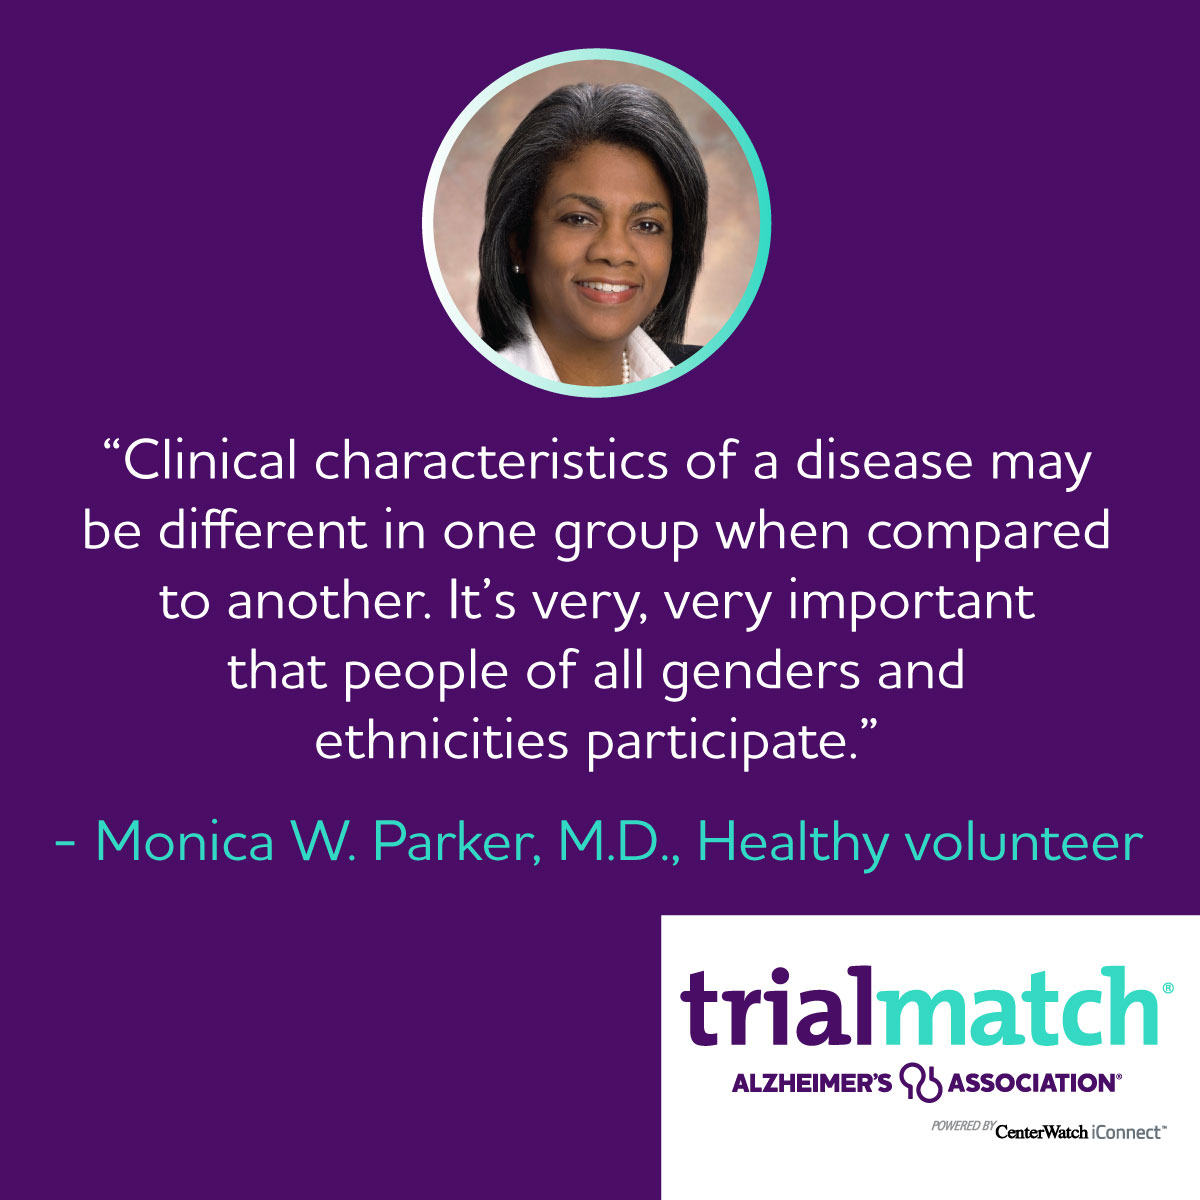 Older Black Americans are about twice as likely to have Alzheimer's or other dementias as older Whites. There's a critical need for Black clinical trial participants. Make a difference by joining @alzassociation TrialMatch today: alz.org/TrialMatch.